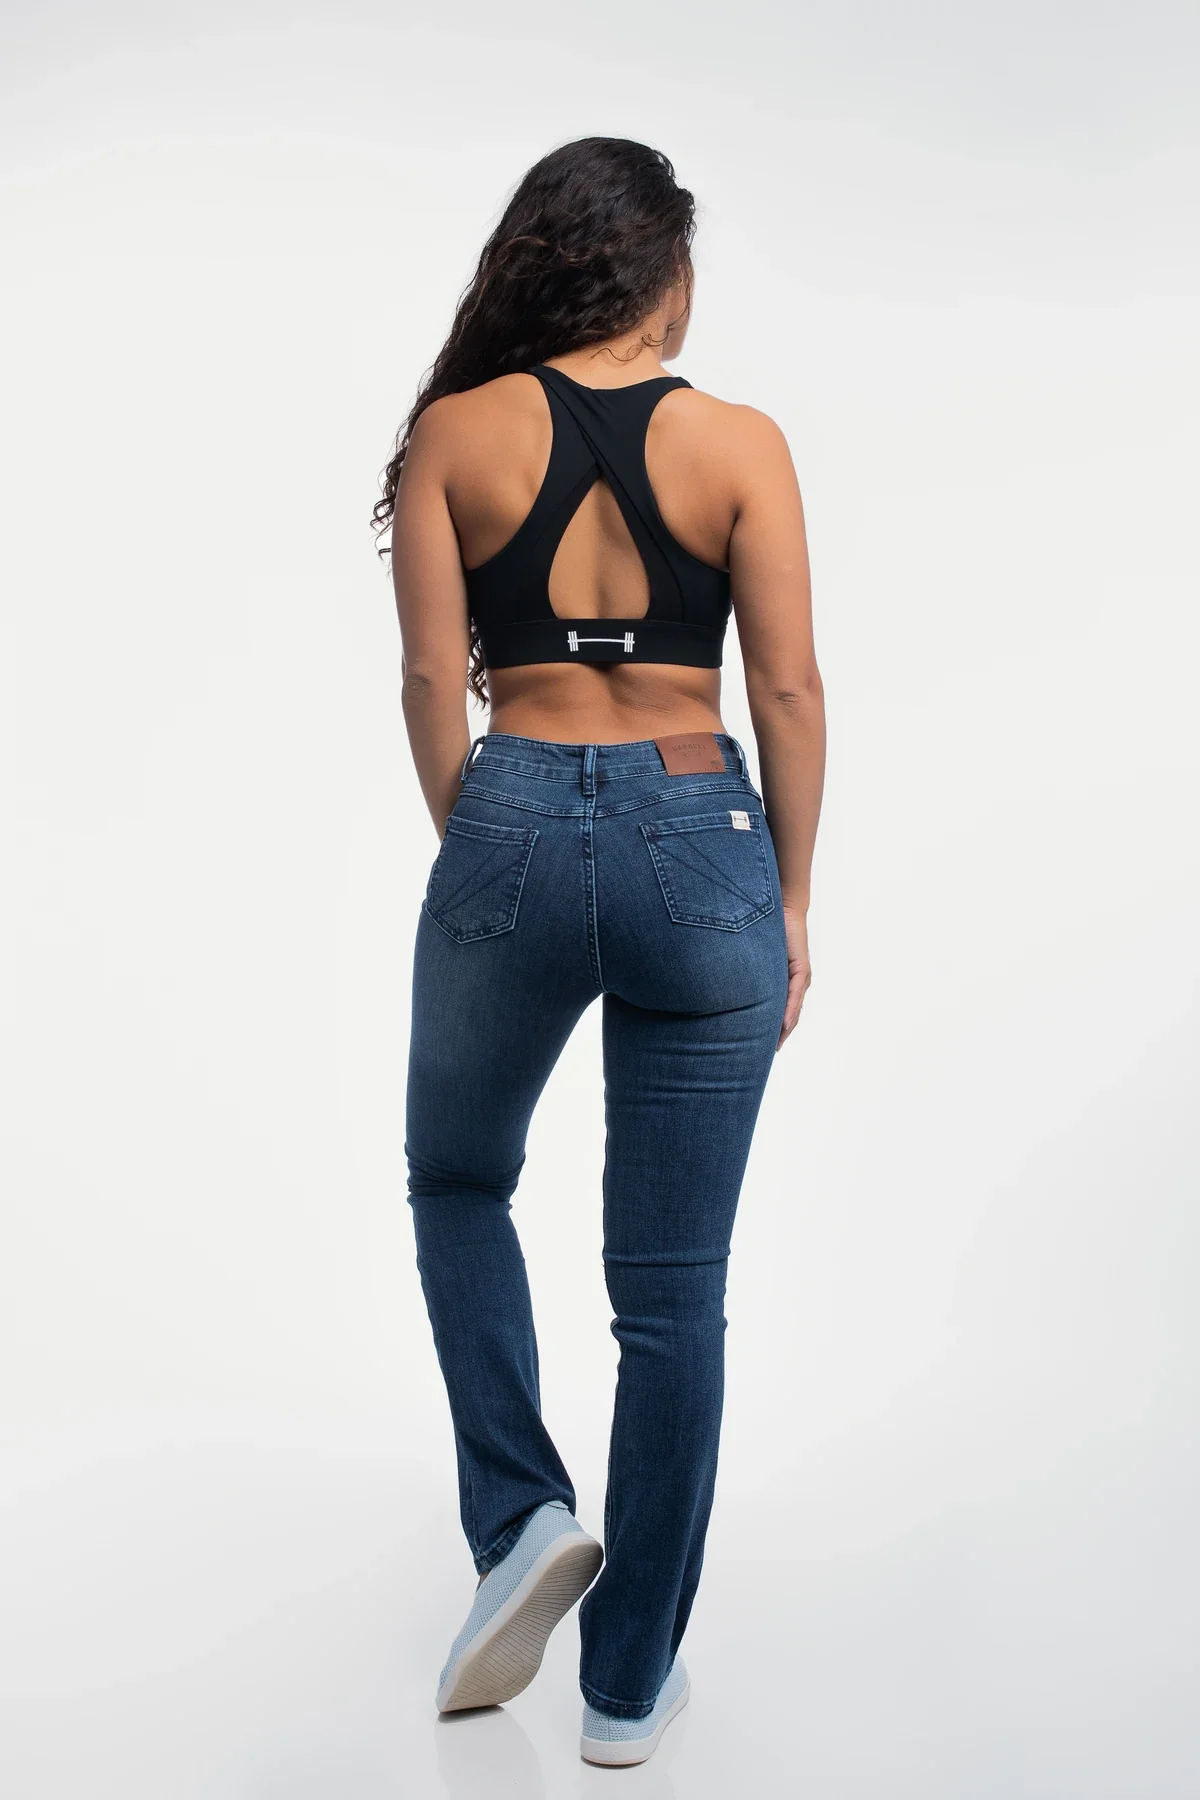 Athletic jeans, in recent years, there has been a significant shift in women's fashion towards pieces that offer both style and functionality.